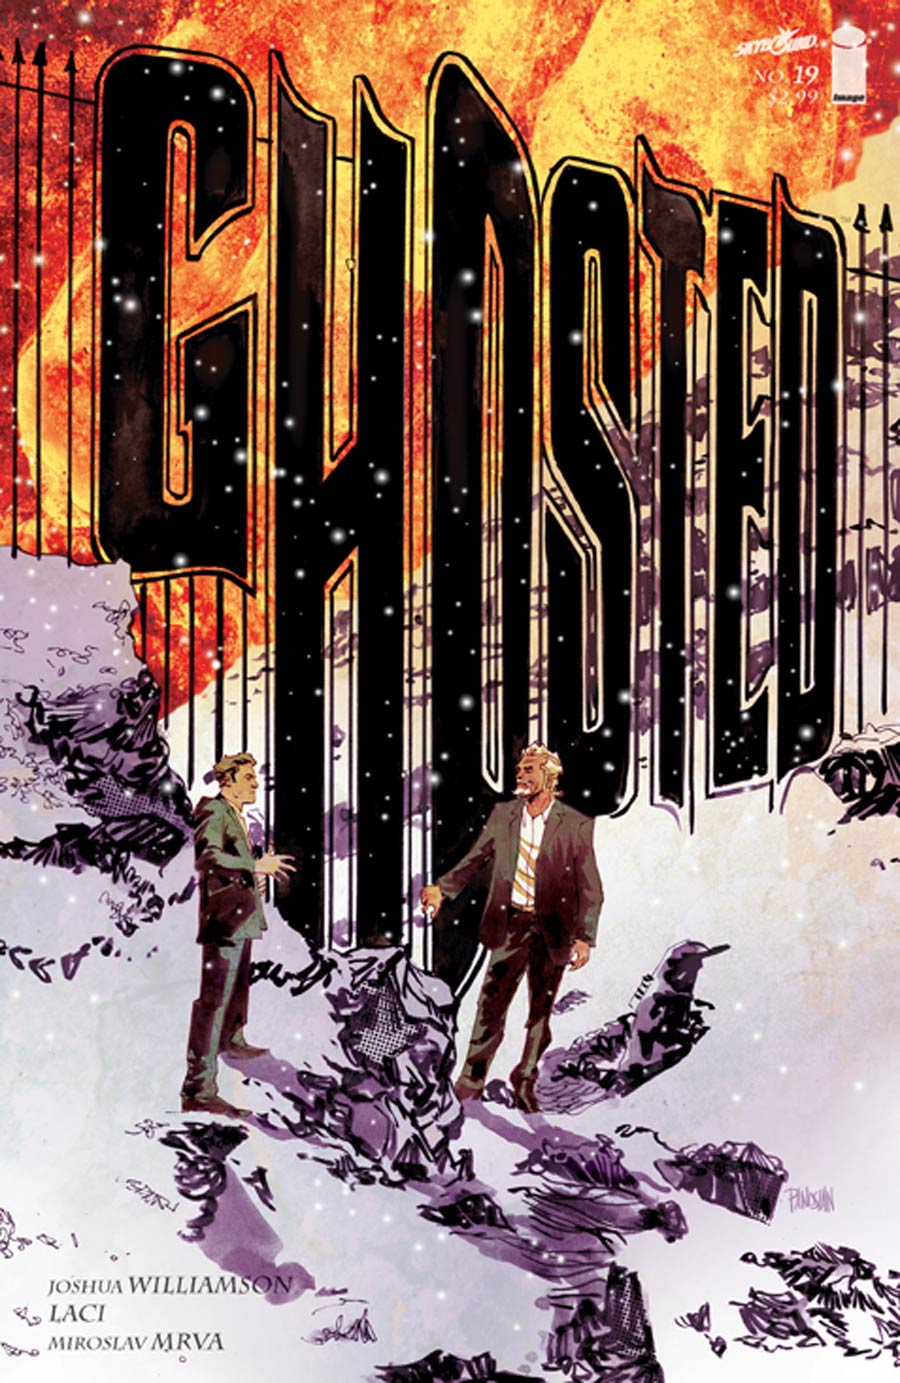 Ghosted #19